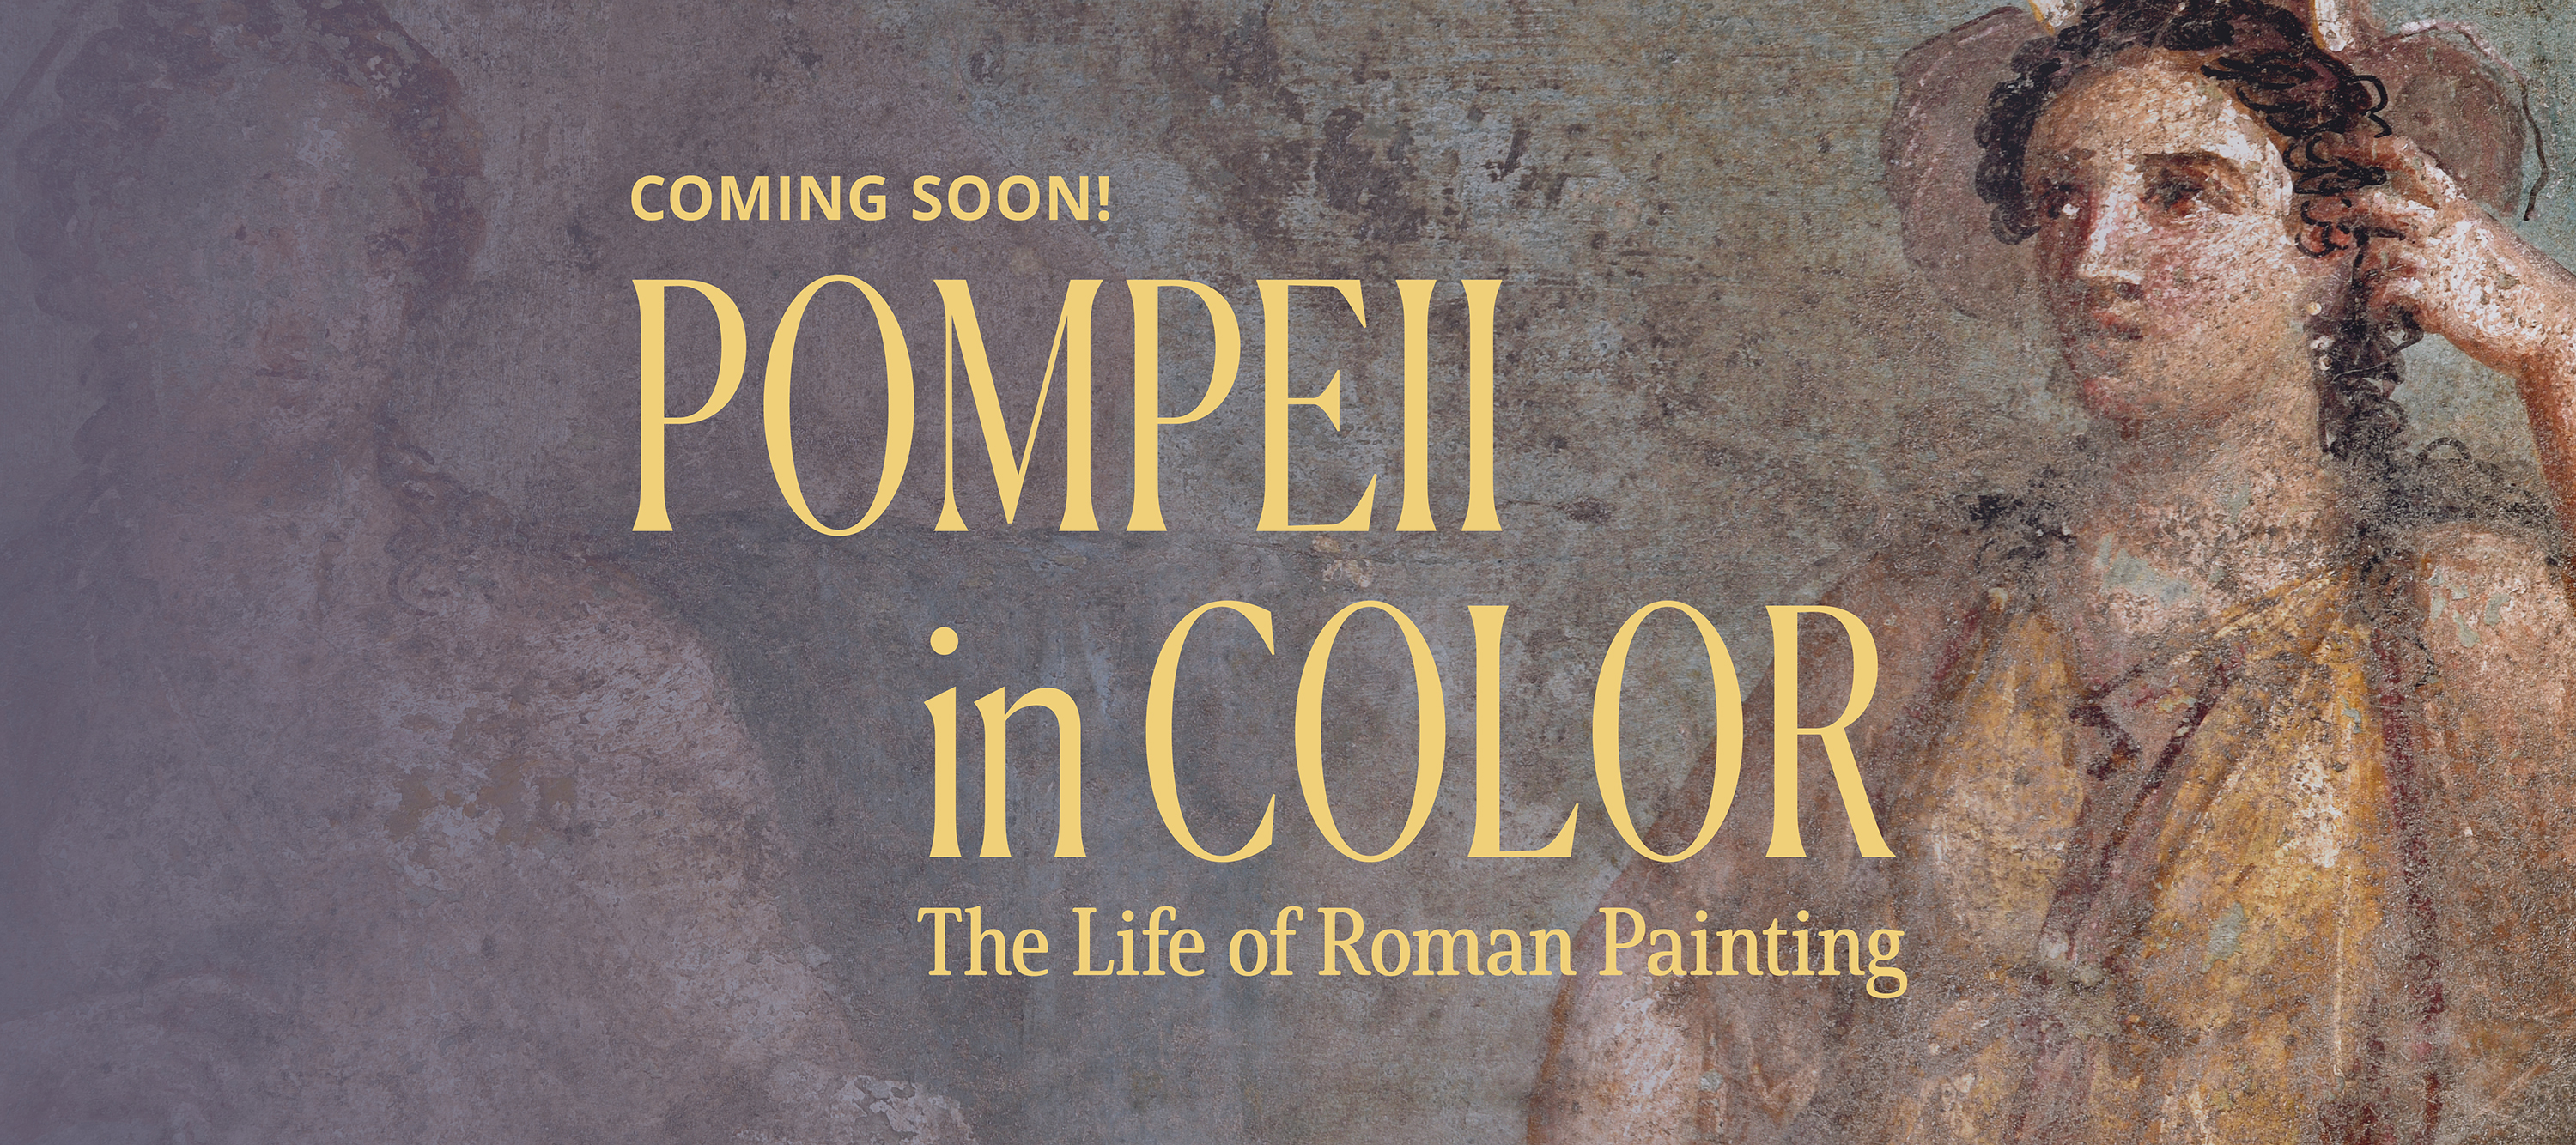 Announcing the next upcoming exhibition, Pompeii in Color, The Life of Roman Painting